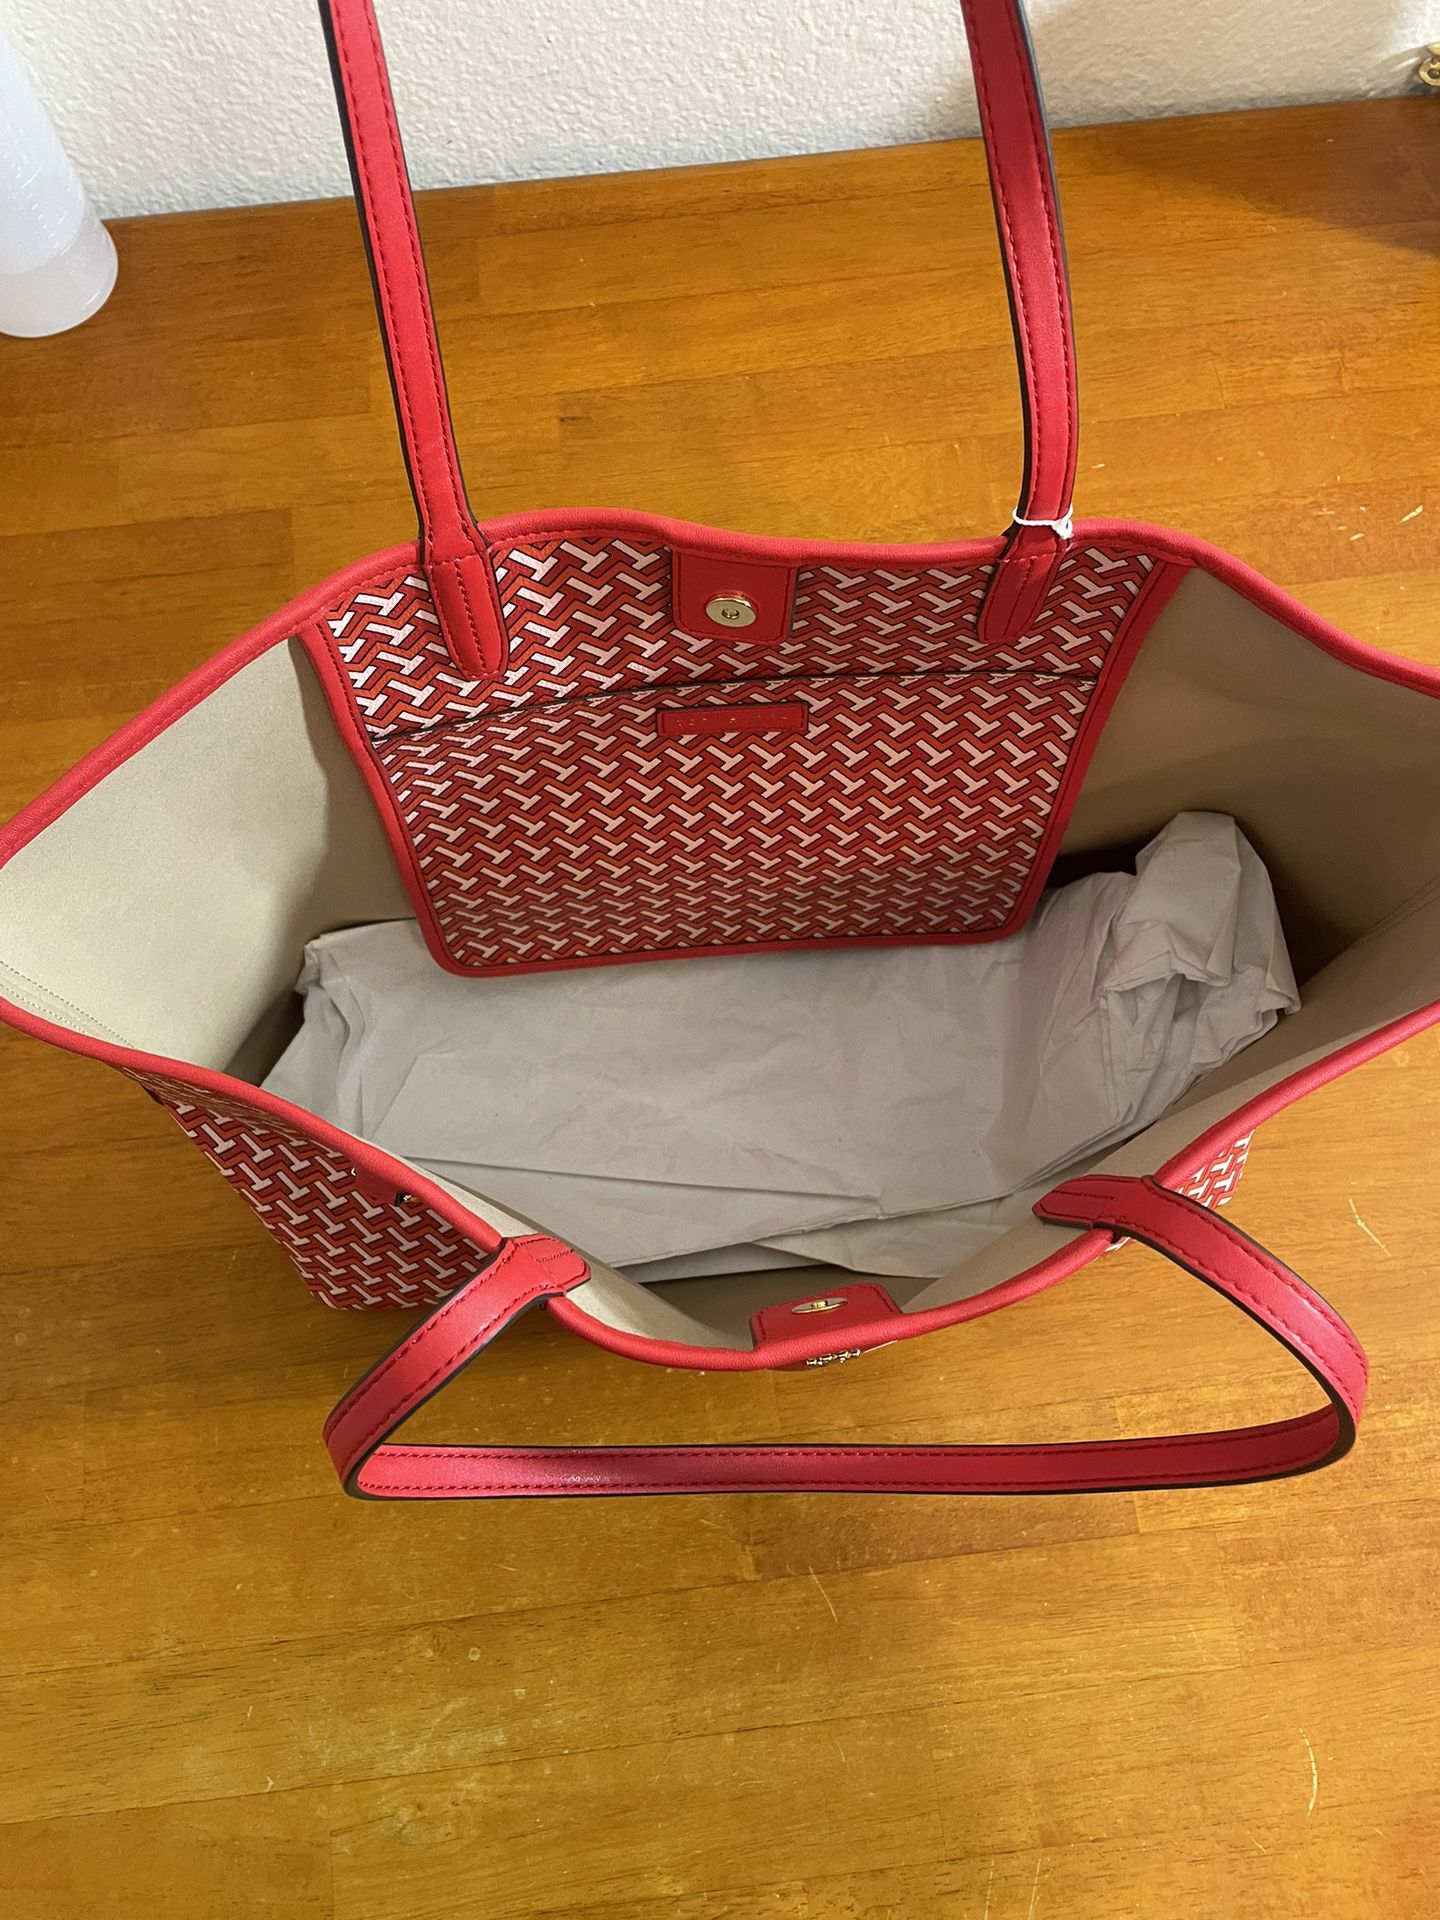 Tory Burch Robinson Small Tote for Sale in San Jose, CA - OfferUp